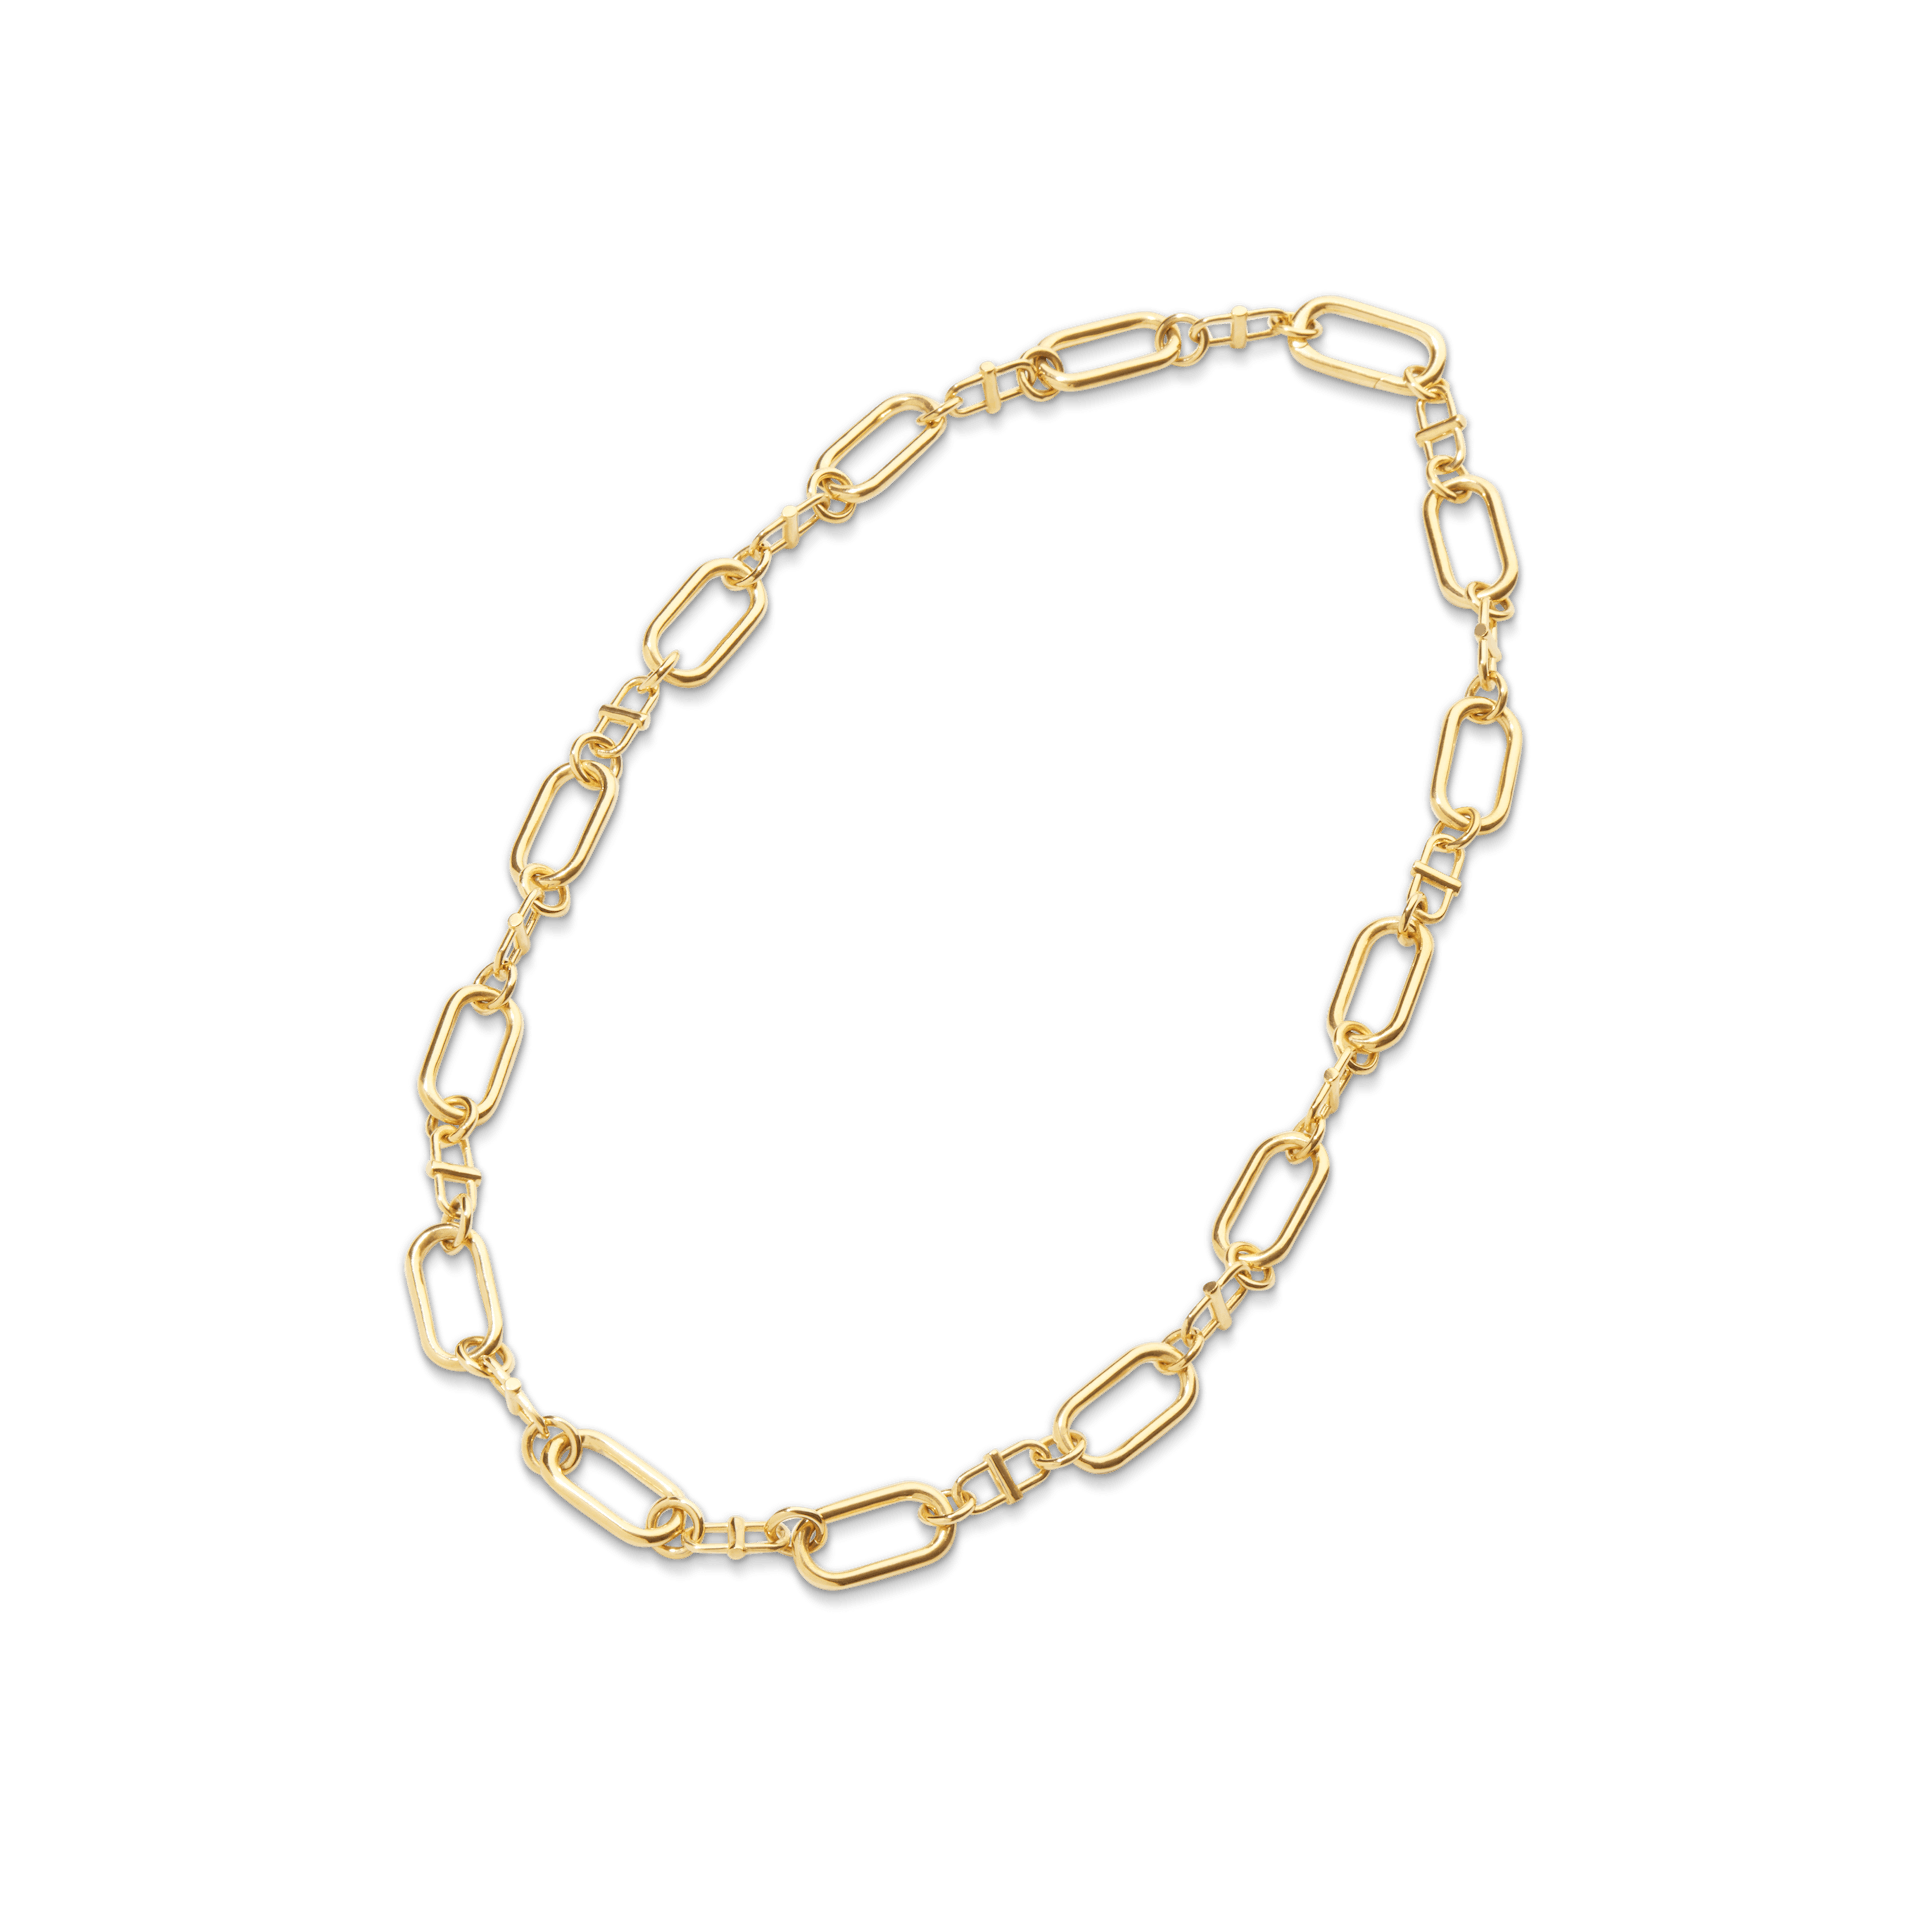 Ashley Gold Stainless Steel Bike Chain